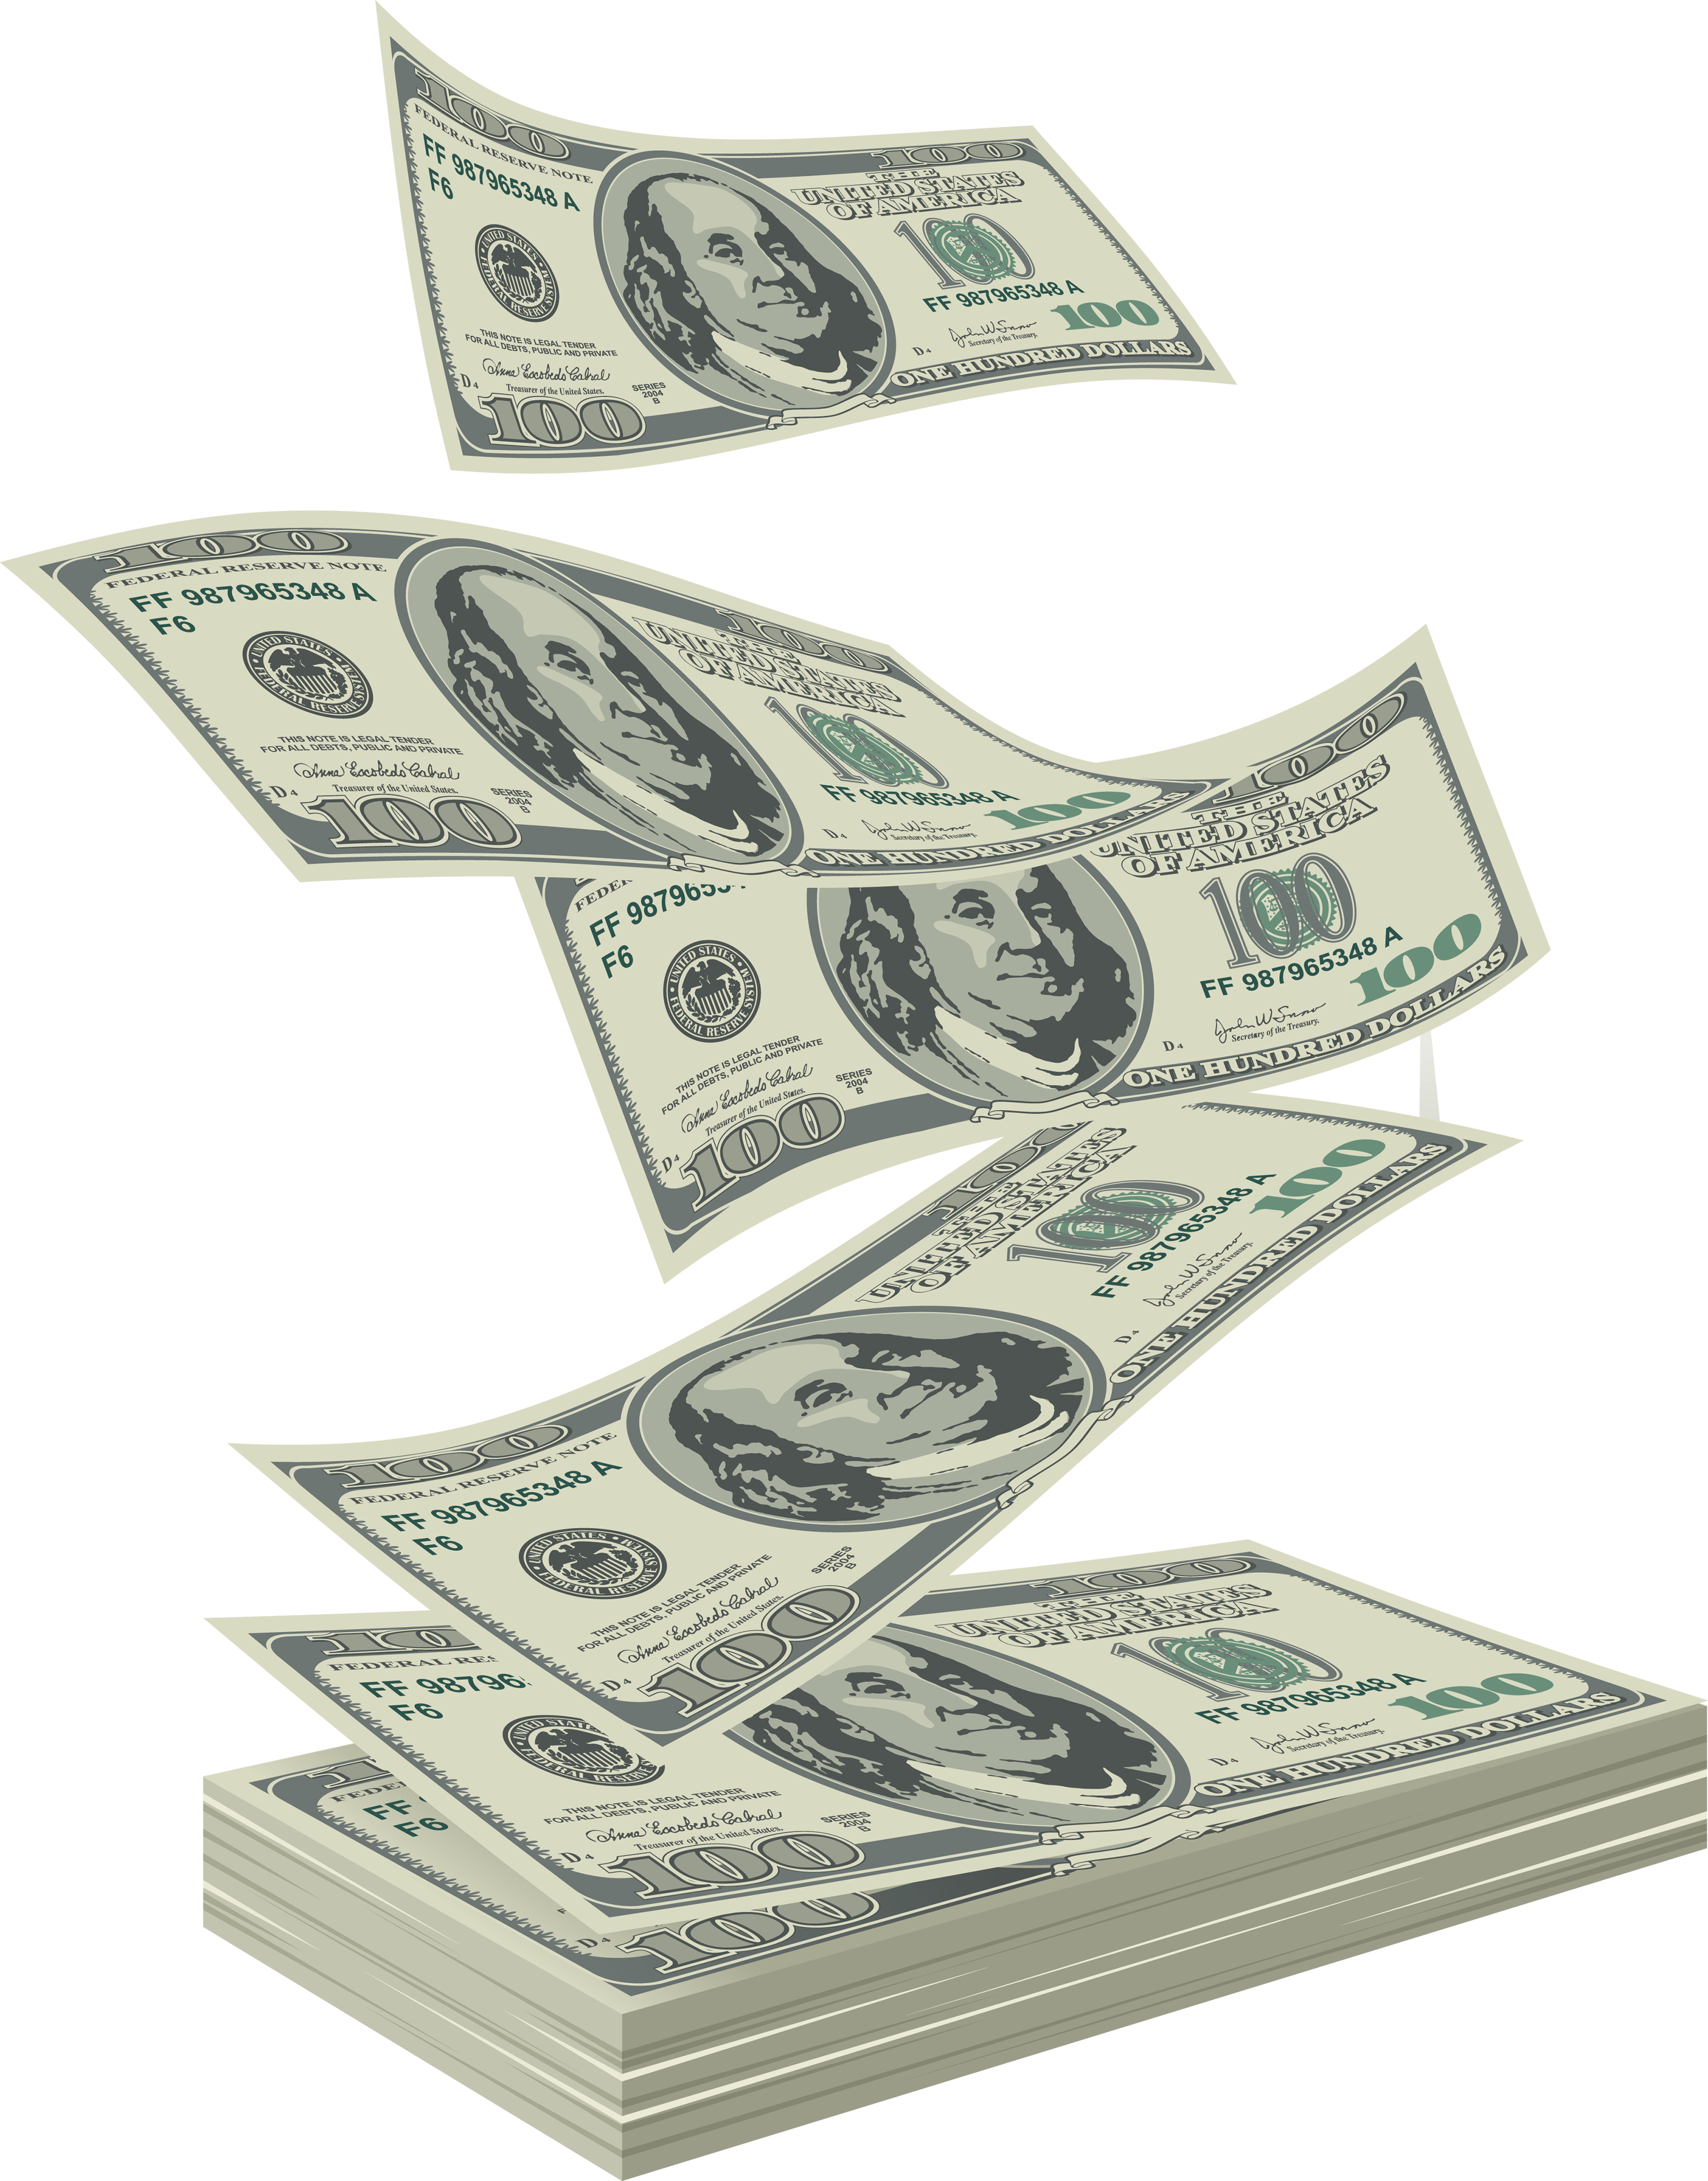 Buck clipart notes free. Money image png